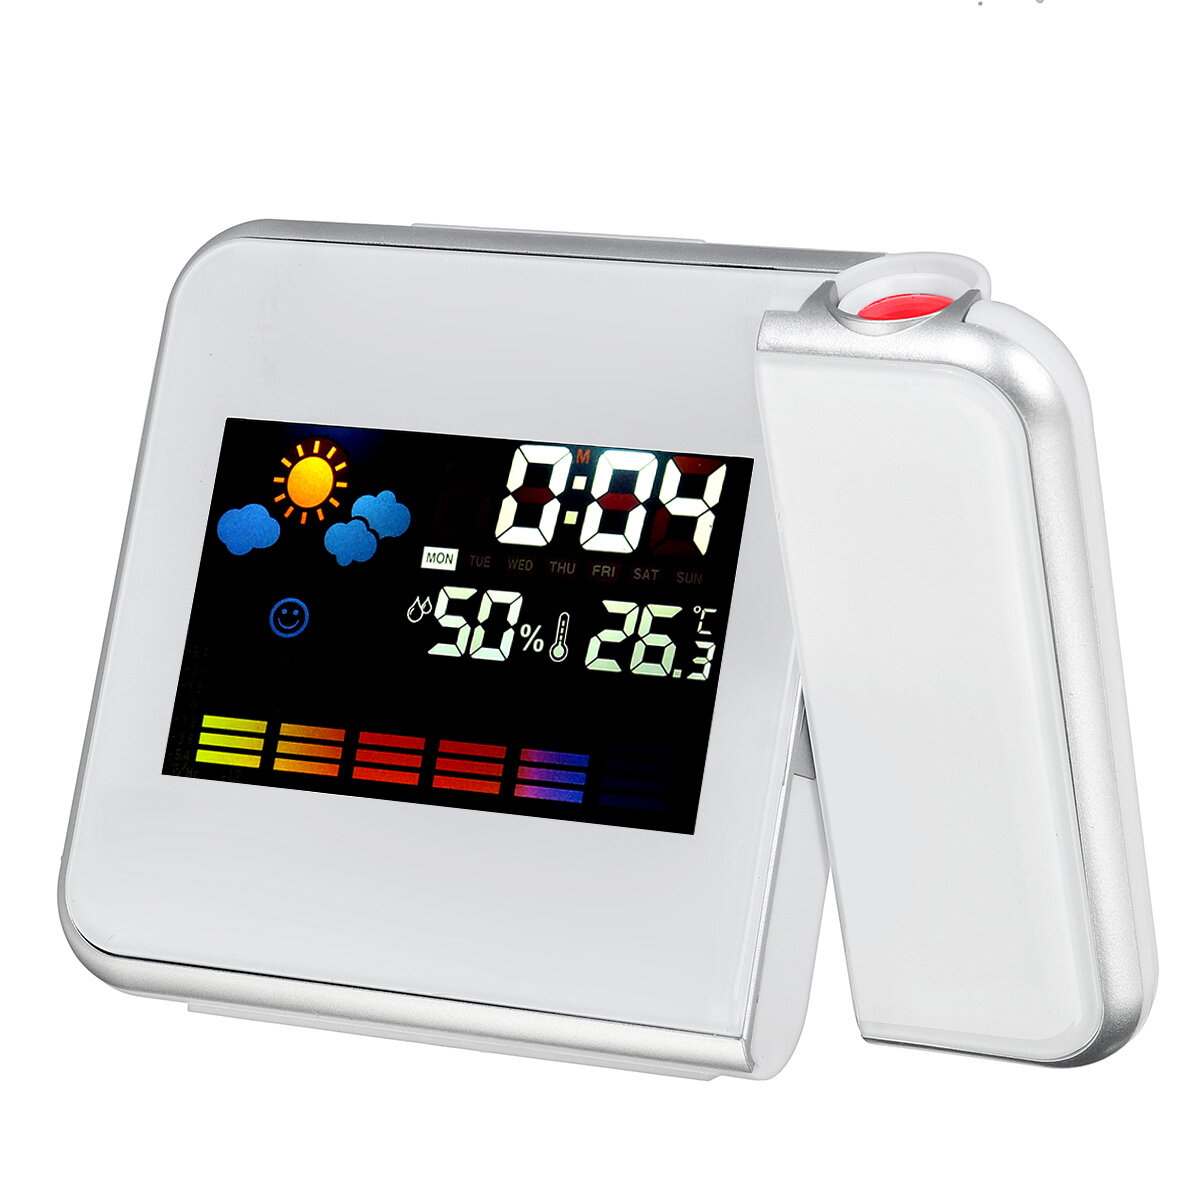 

Smart Digital Display Alarm Clock Projection Snooze LED Backlight Home Weather Station with USB Charge Desktop Decoratio